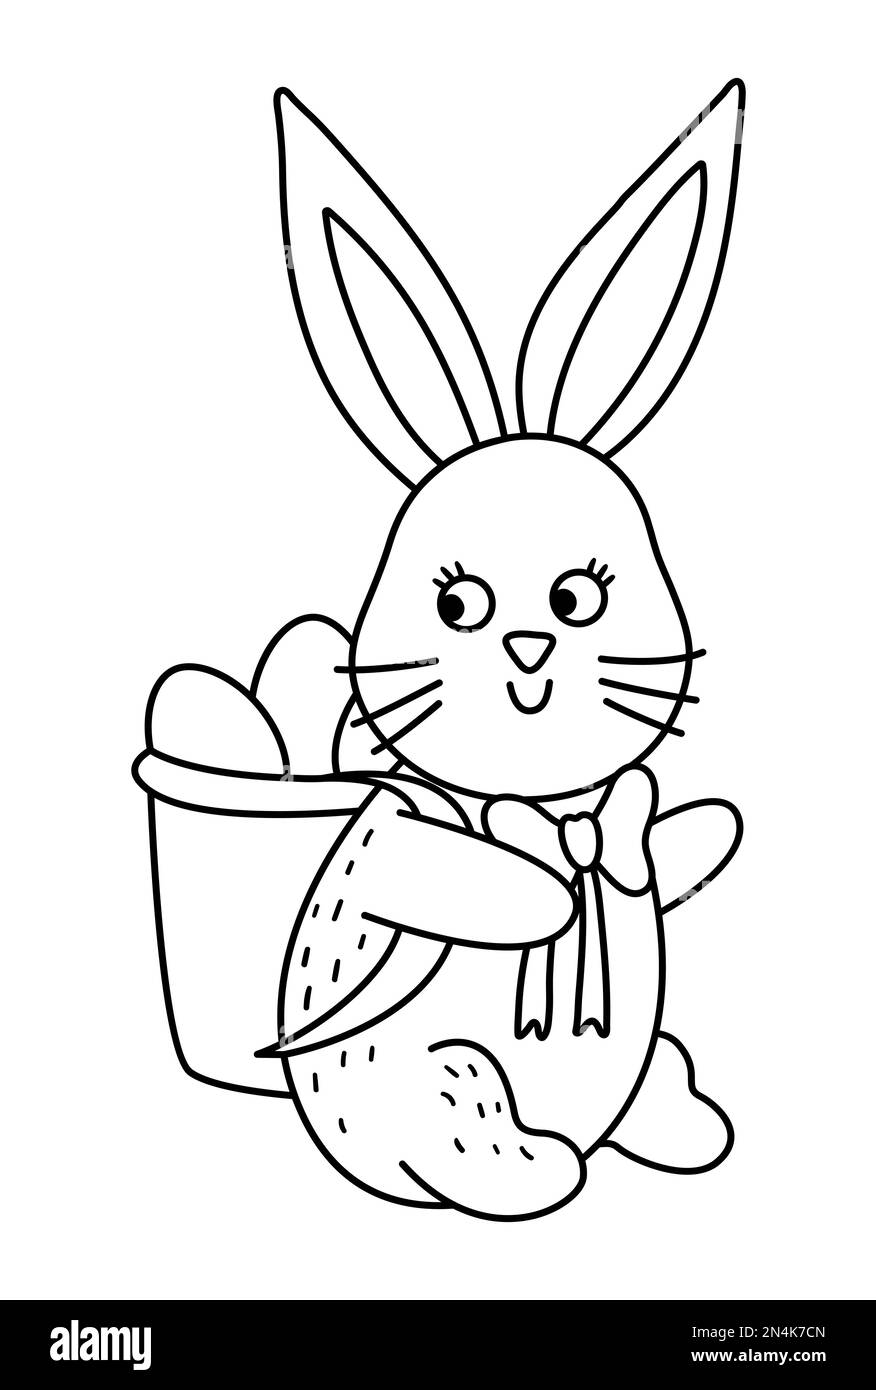 Vector black and white bunny carrying basket with eggs illustration ...